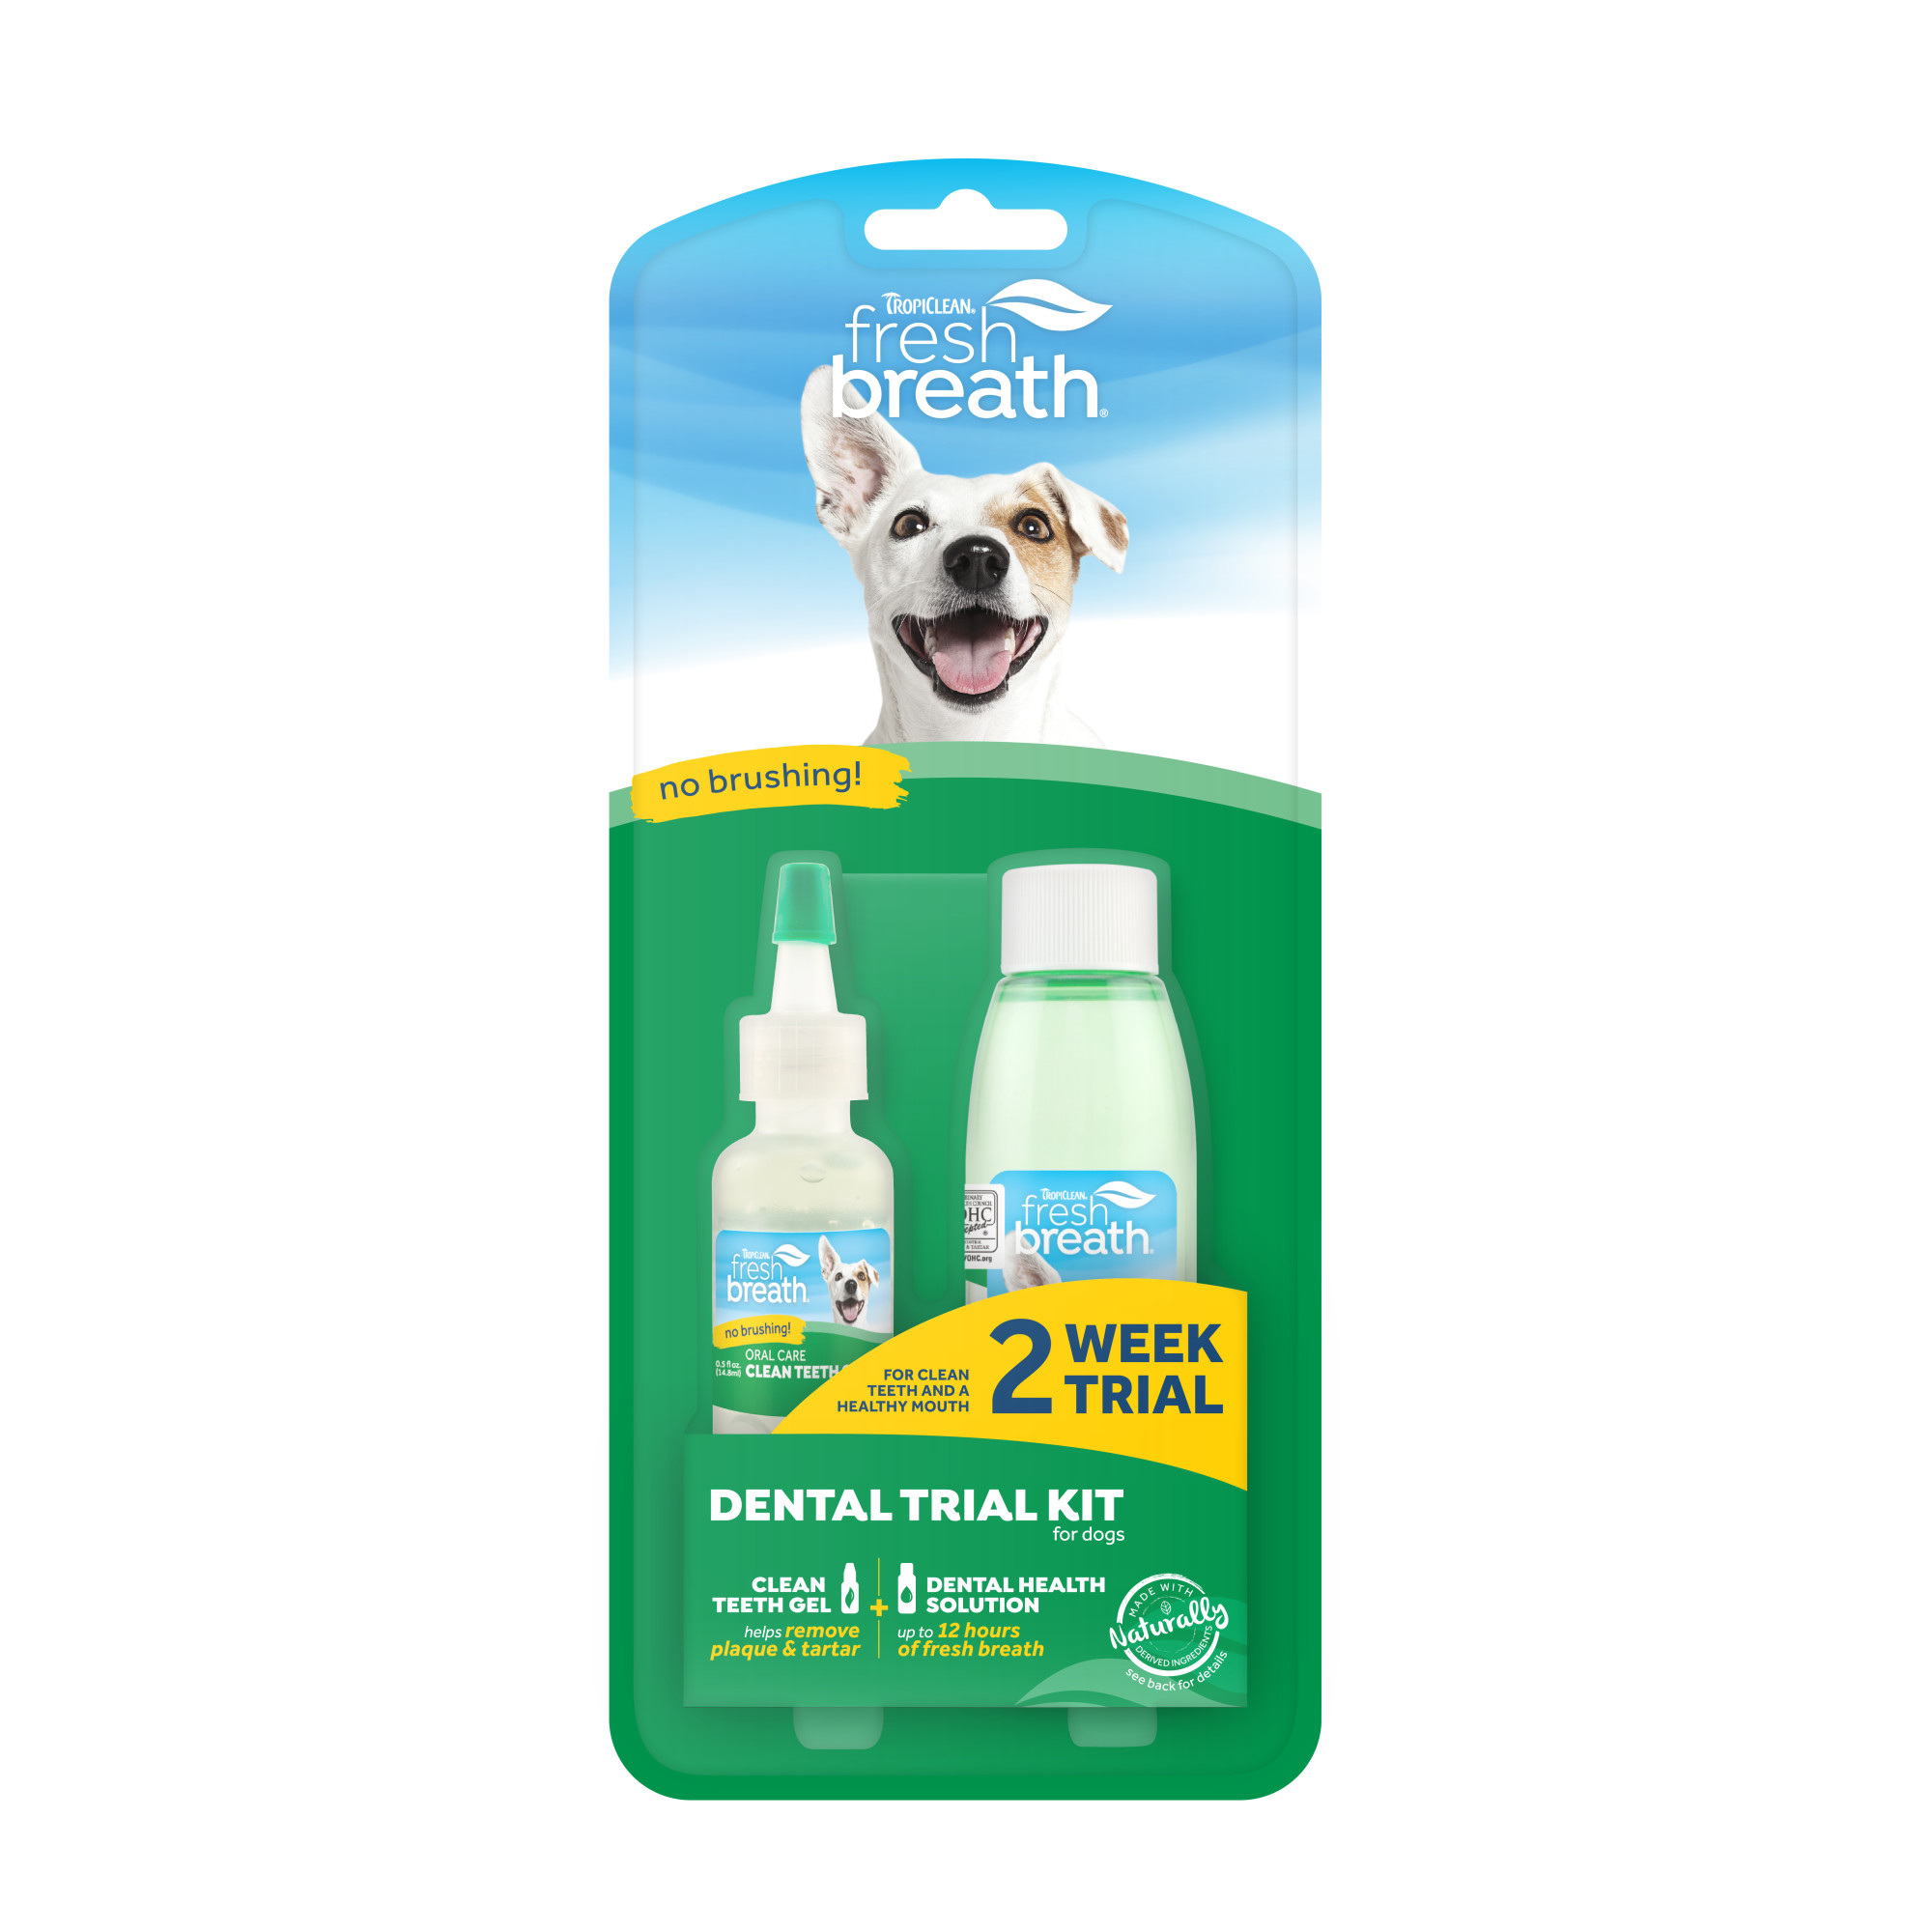 Dental Trial Kit for Dogs - Tropiclean